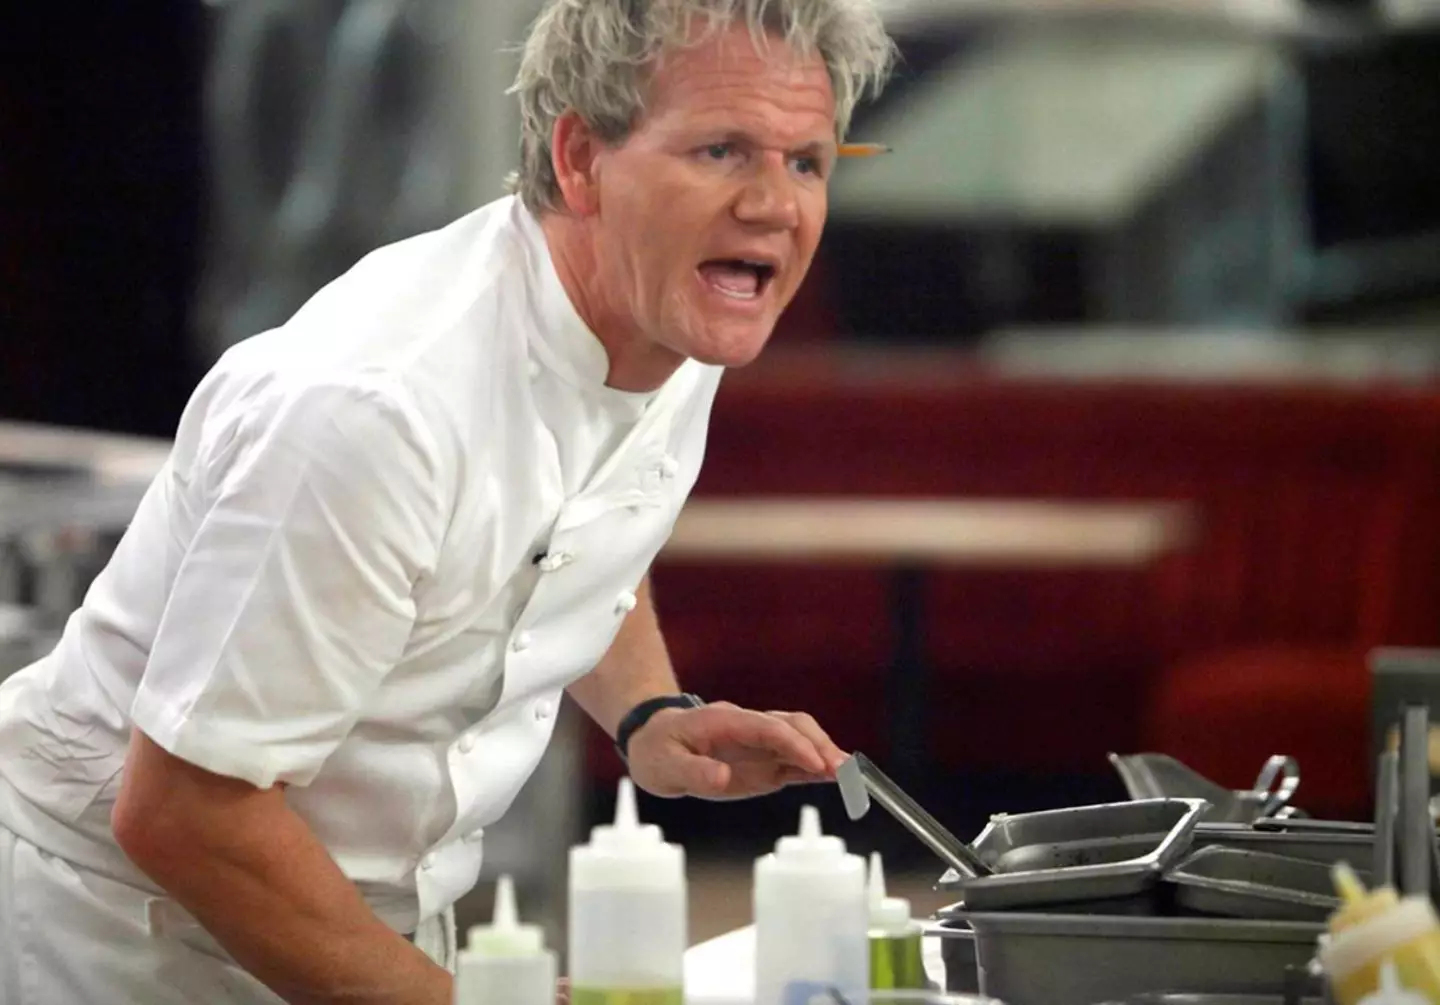 Gordon Ramsay has a number of restaurants scattered across across the world.